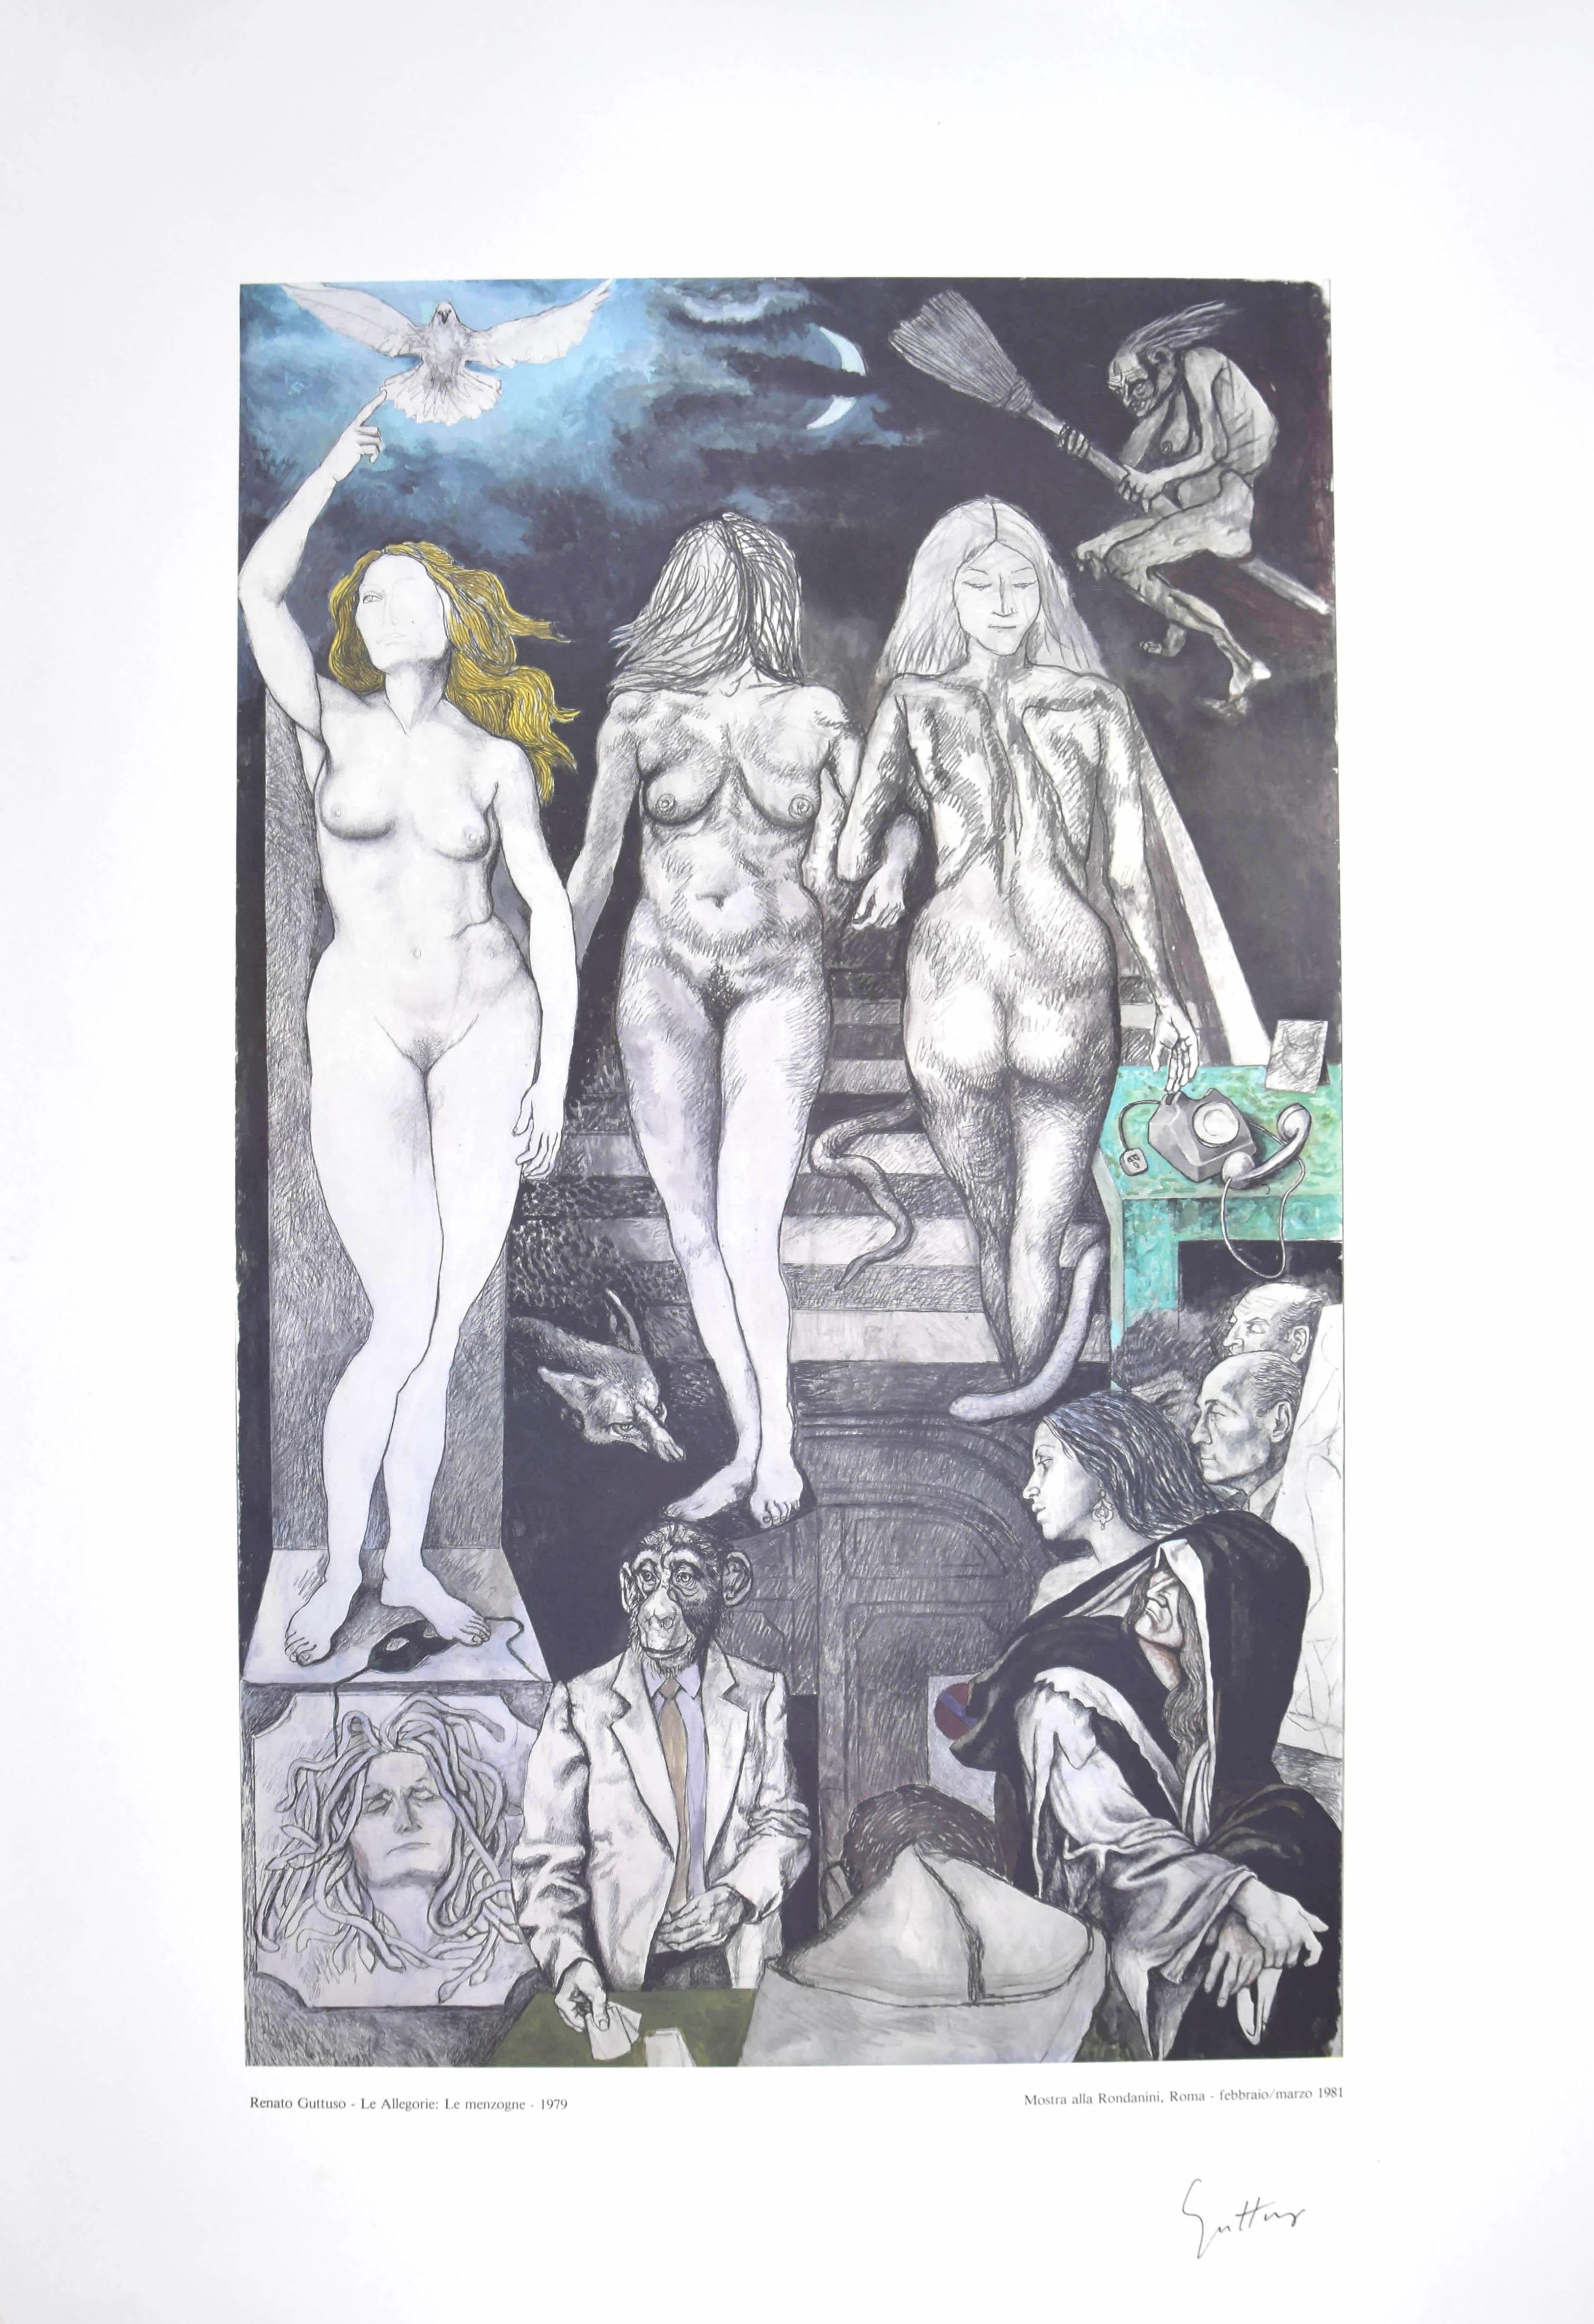 Renato Guttuso Figurative Print - Lies - From The Allegories - Vintage Offset Poster Hand Signed - 1981